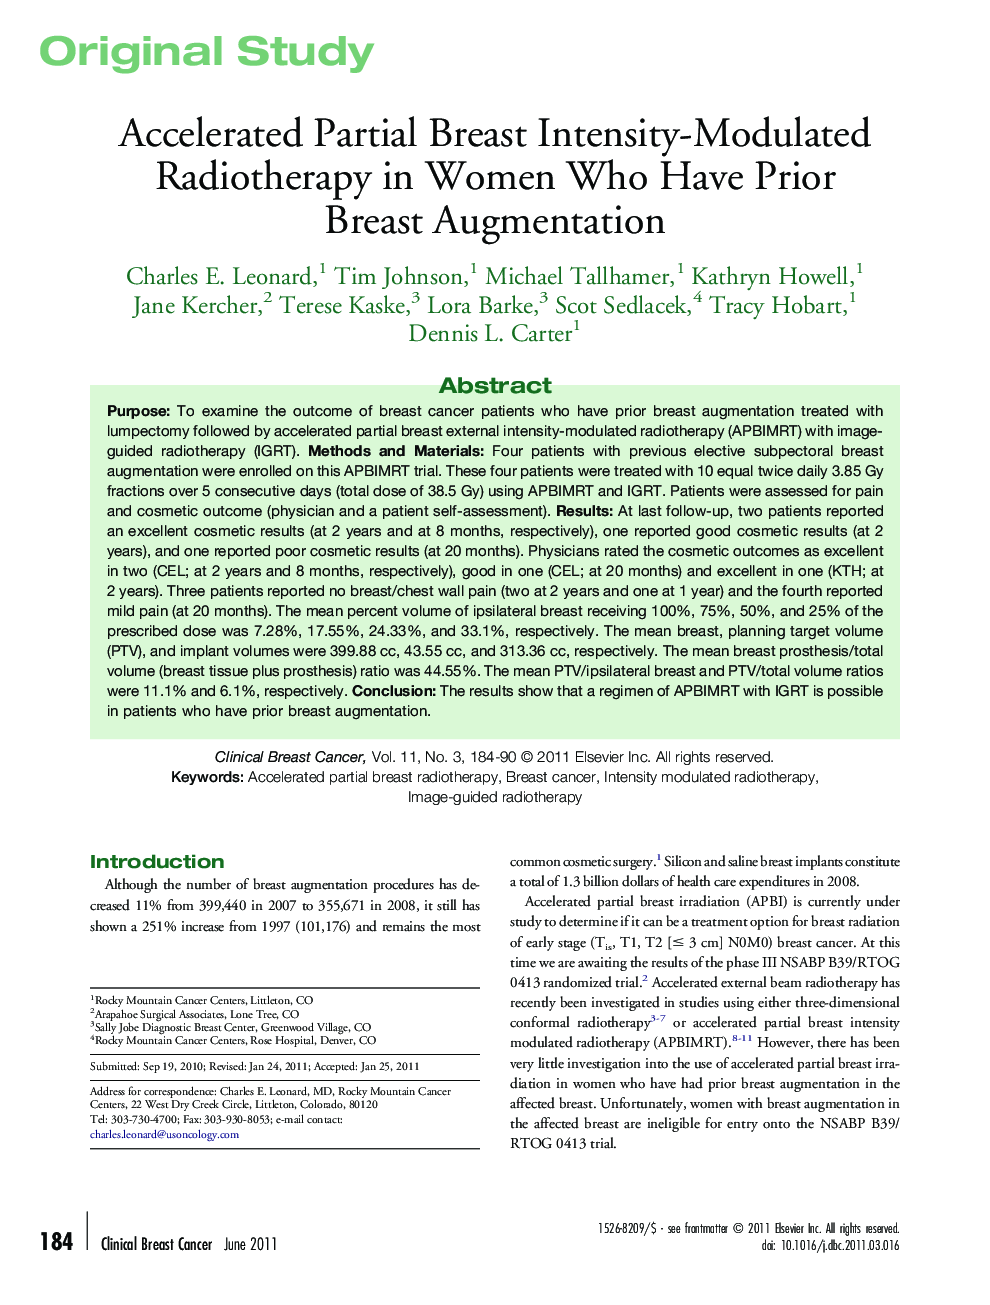 Accelerated Partial Breast Intensity-Modulated Radiotherapy in Women Who Have Prior Breast Augmentation